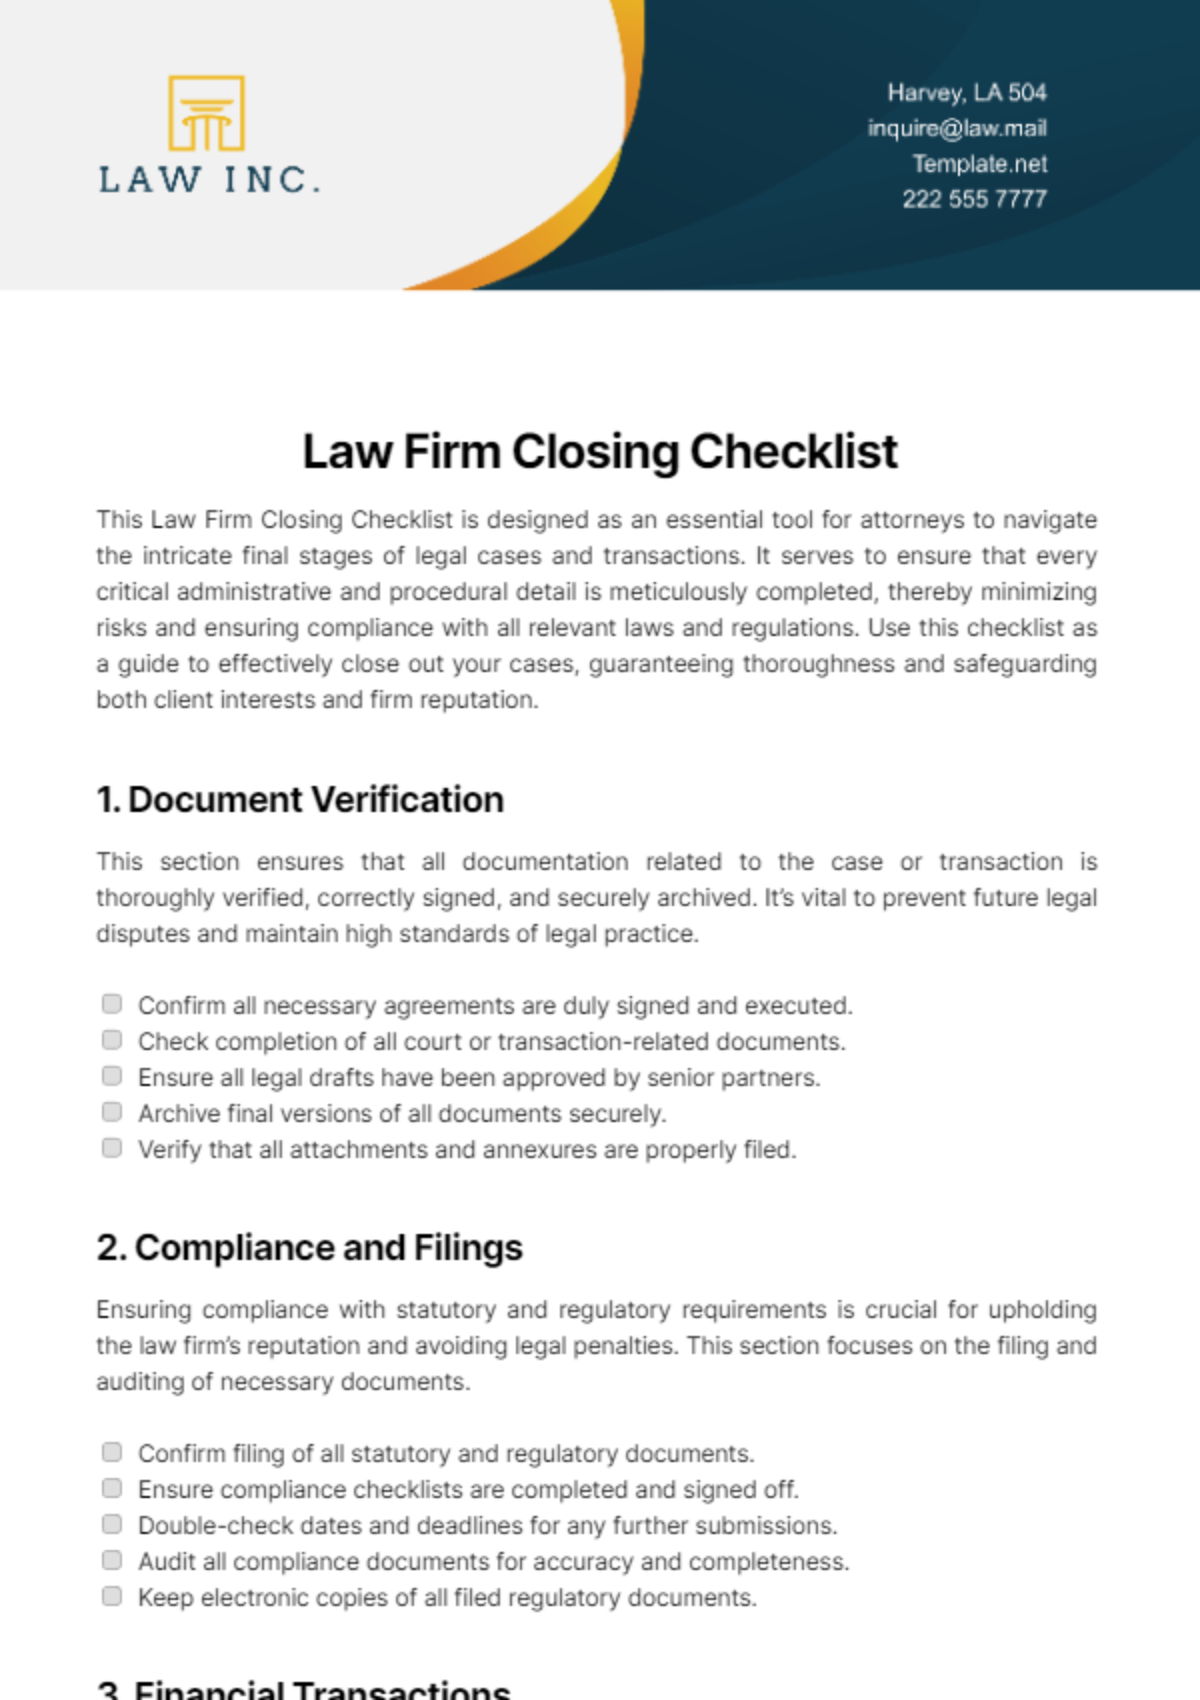 Law Firm Closing Checklist Template